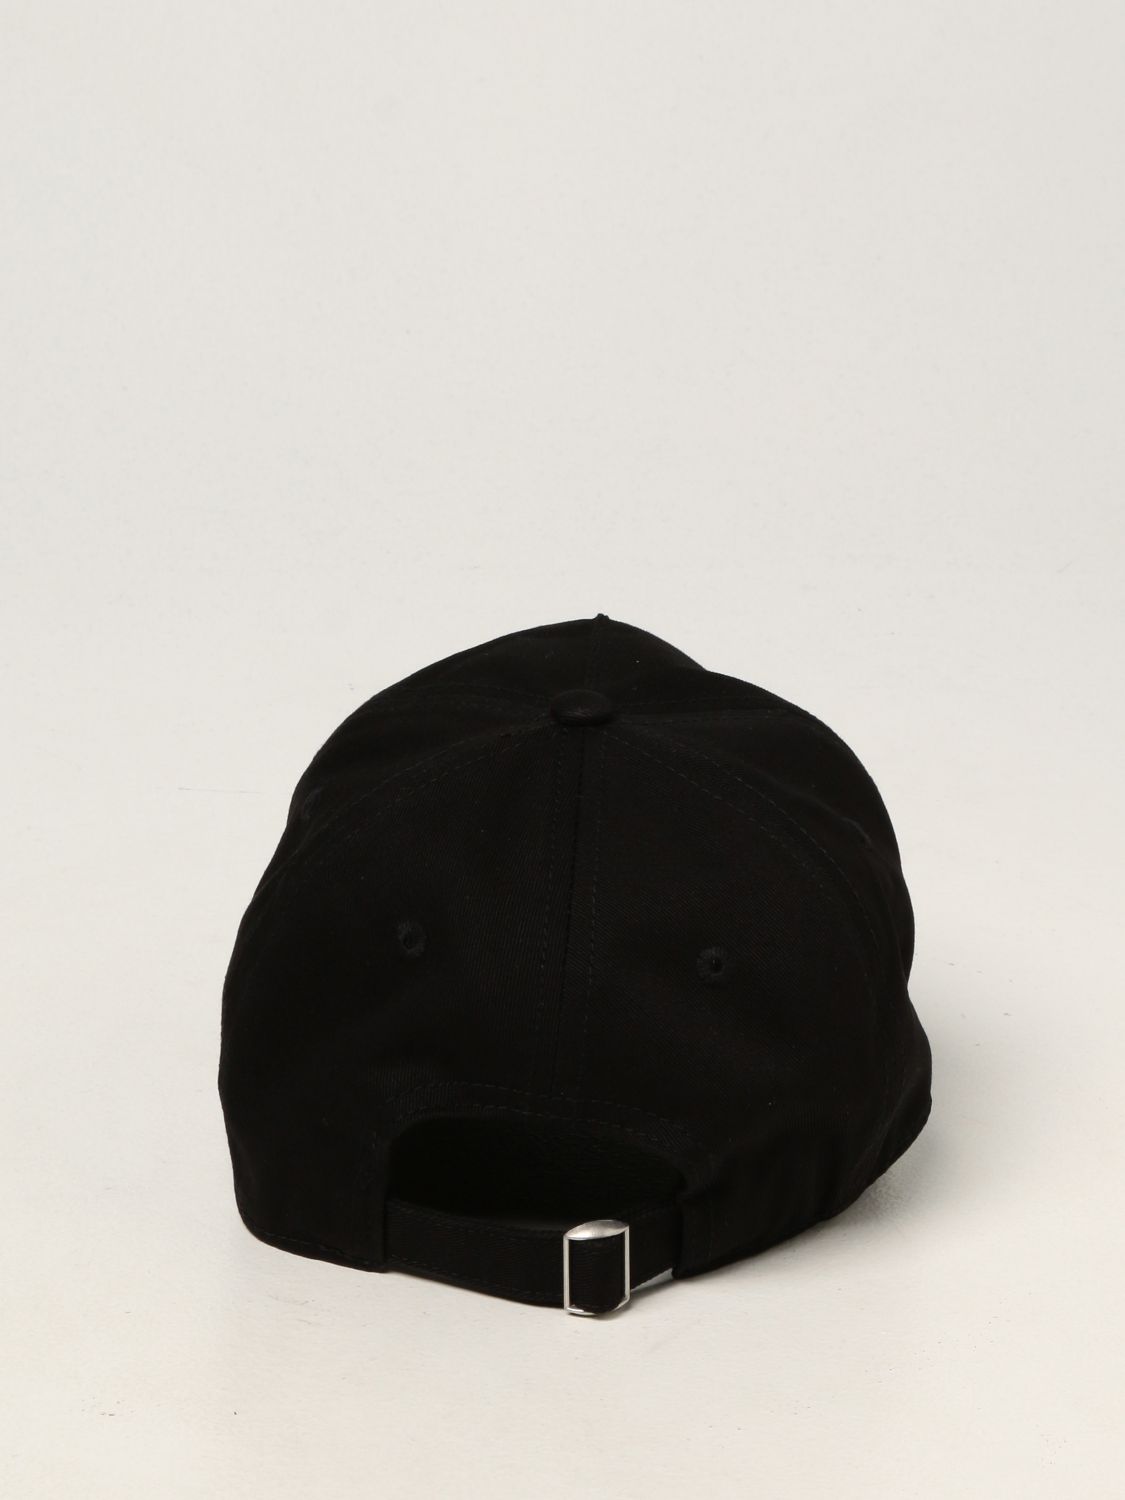 Girls' hats Off-White: Off White baseball cap with embroidered flower logo black 3